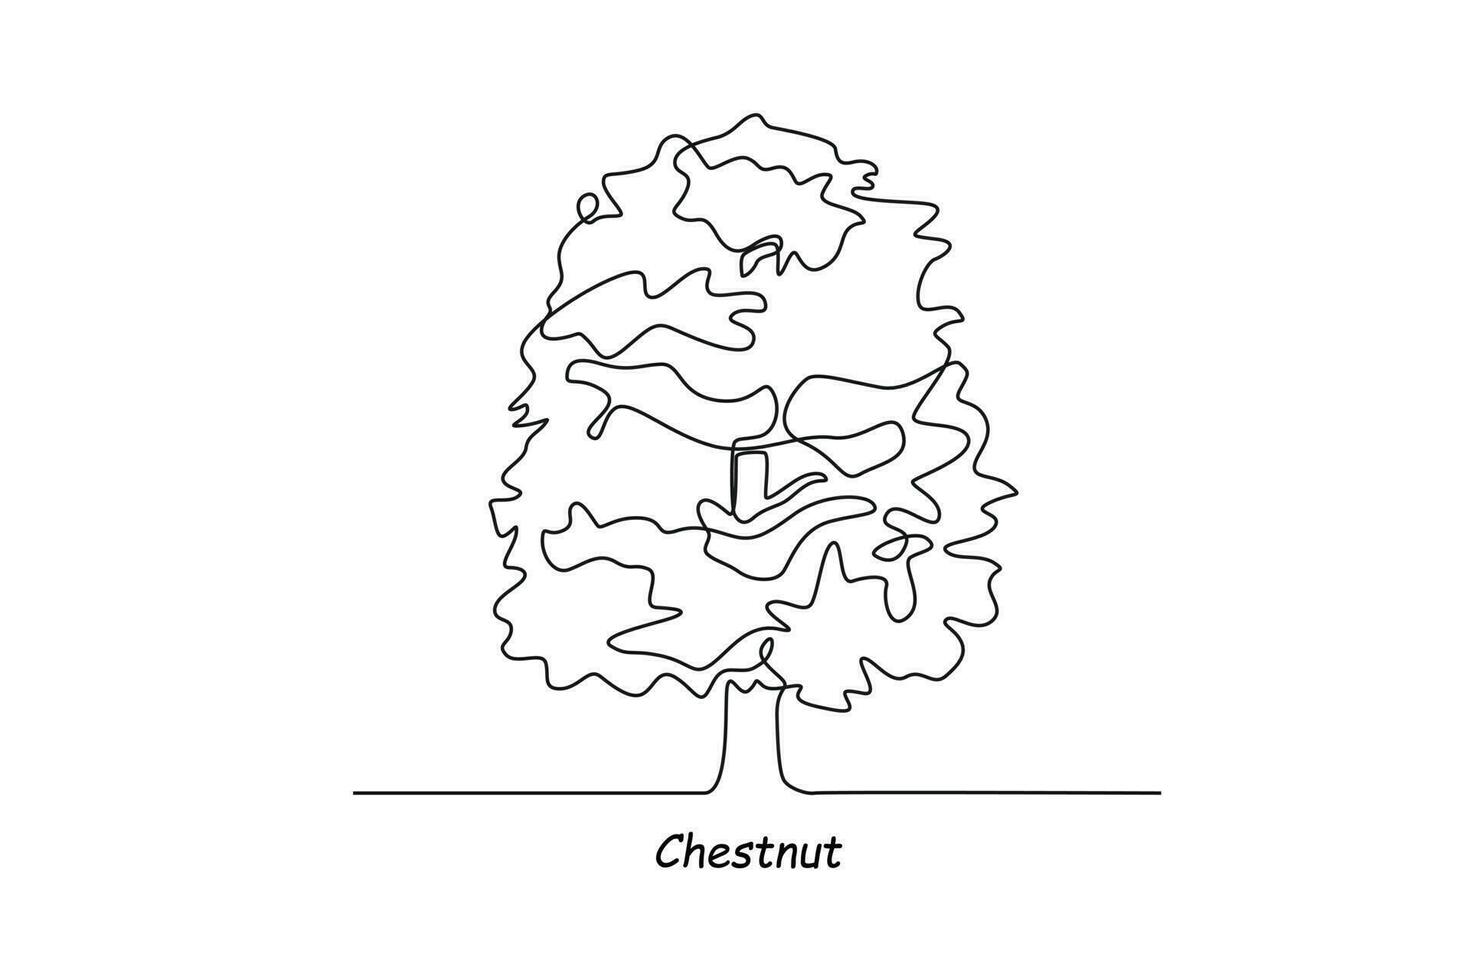 Single one line drawing chestnut. Tree concept. Continuous line draw design graphic vector illustration.